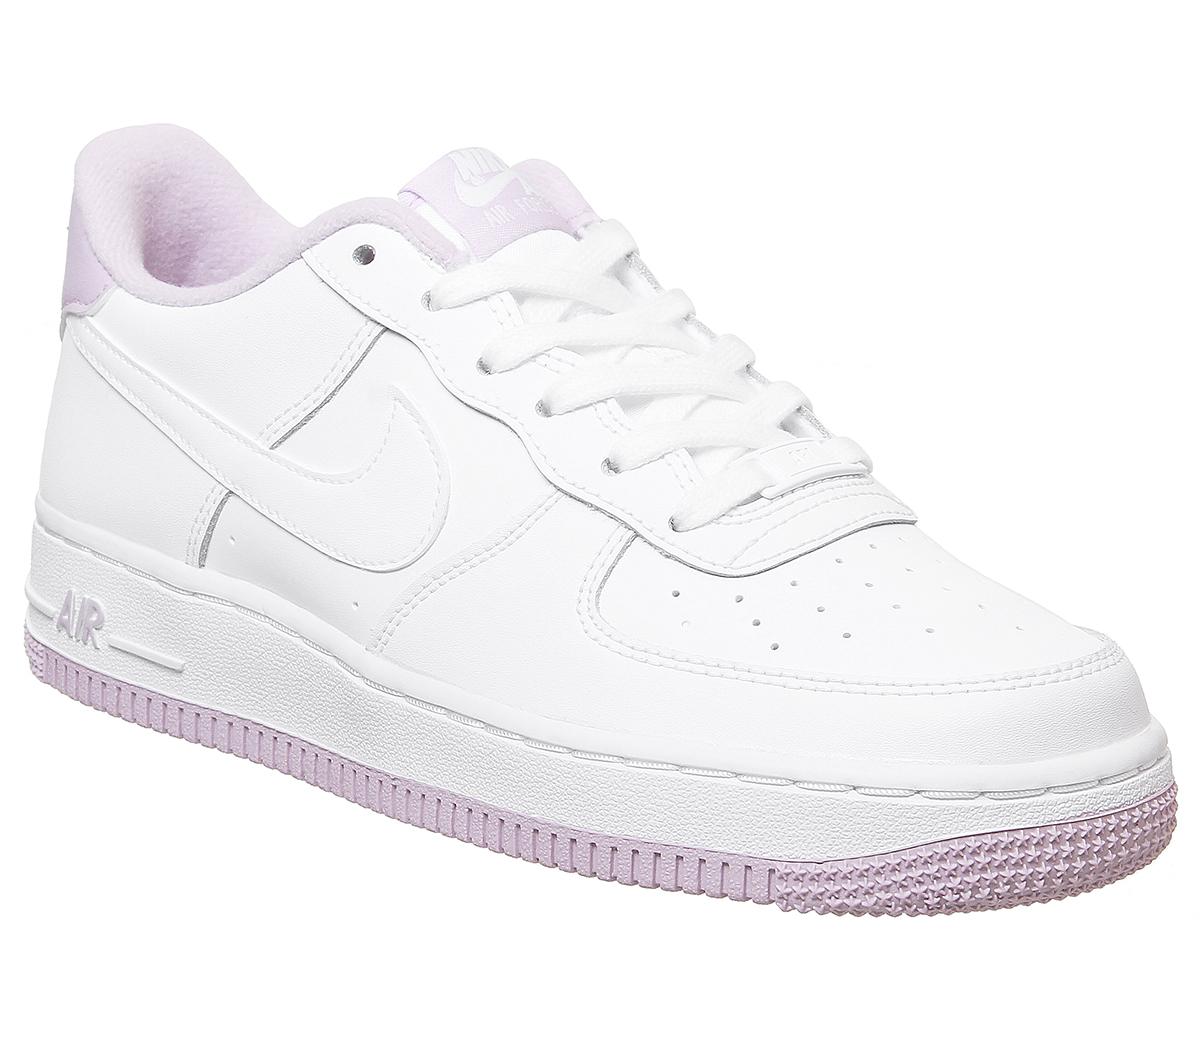 nike air force 1 womens white size 5.5 